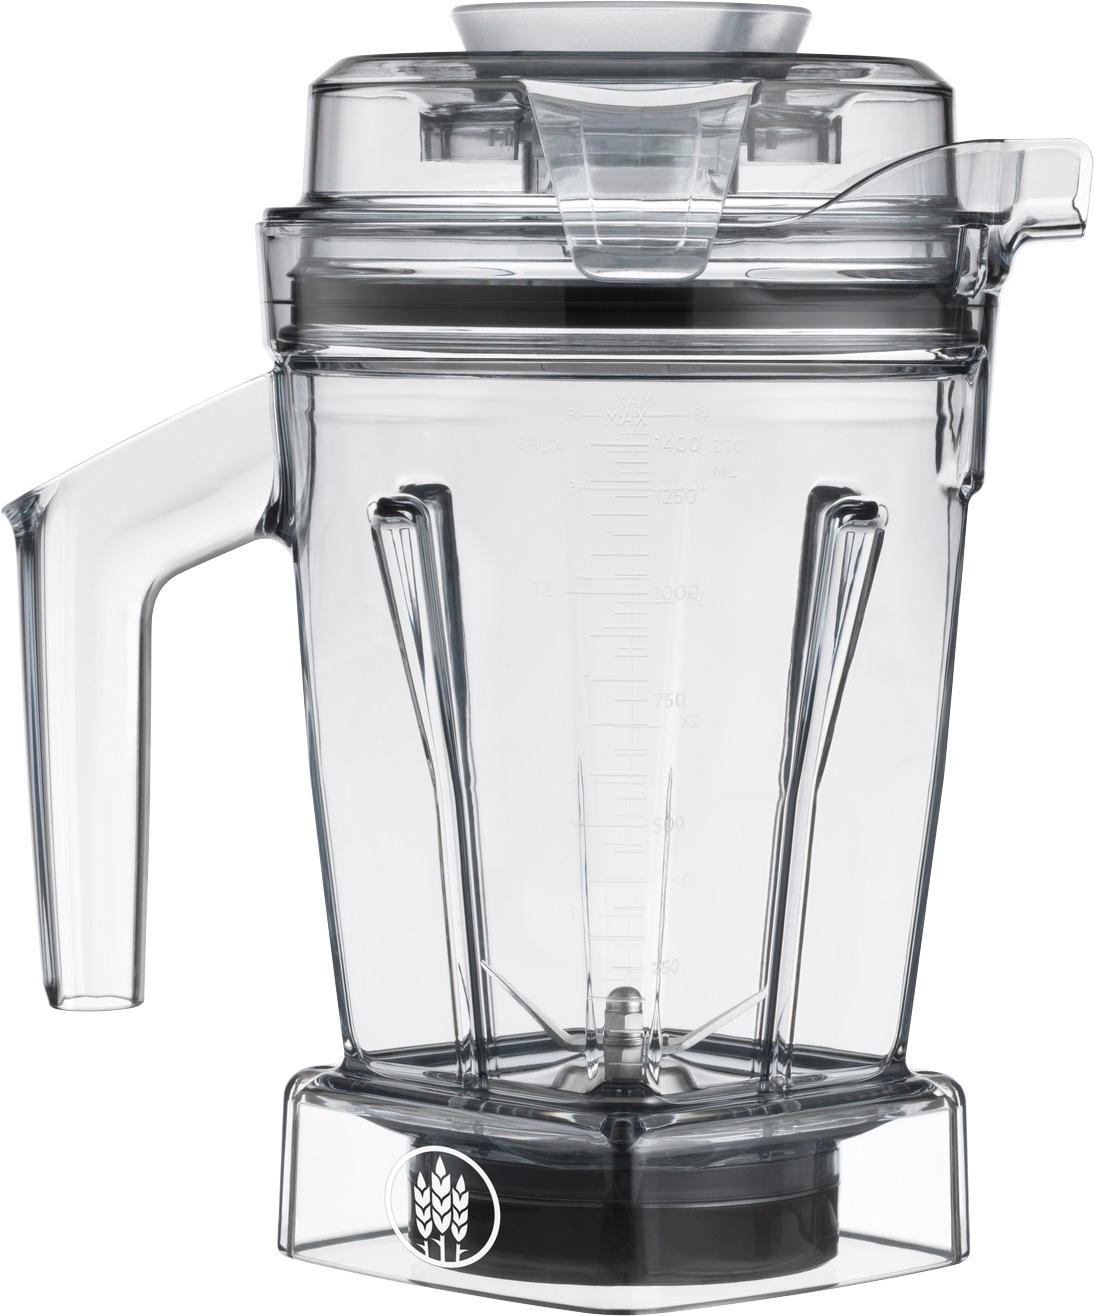 Shop All Vitamix Accessories - Blender Containers, Tampers